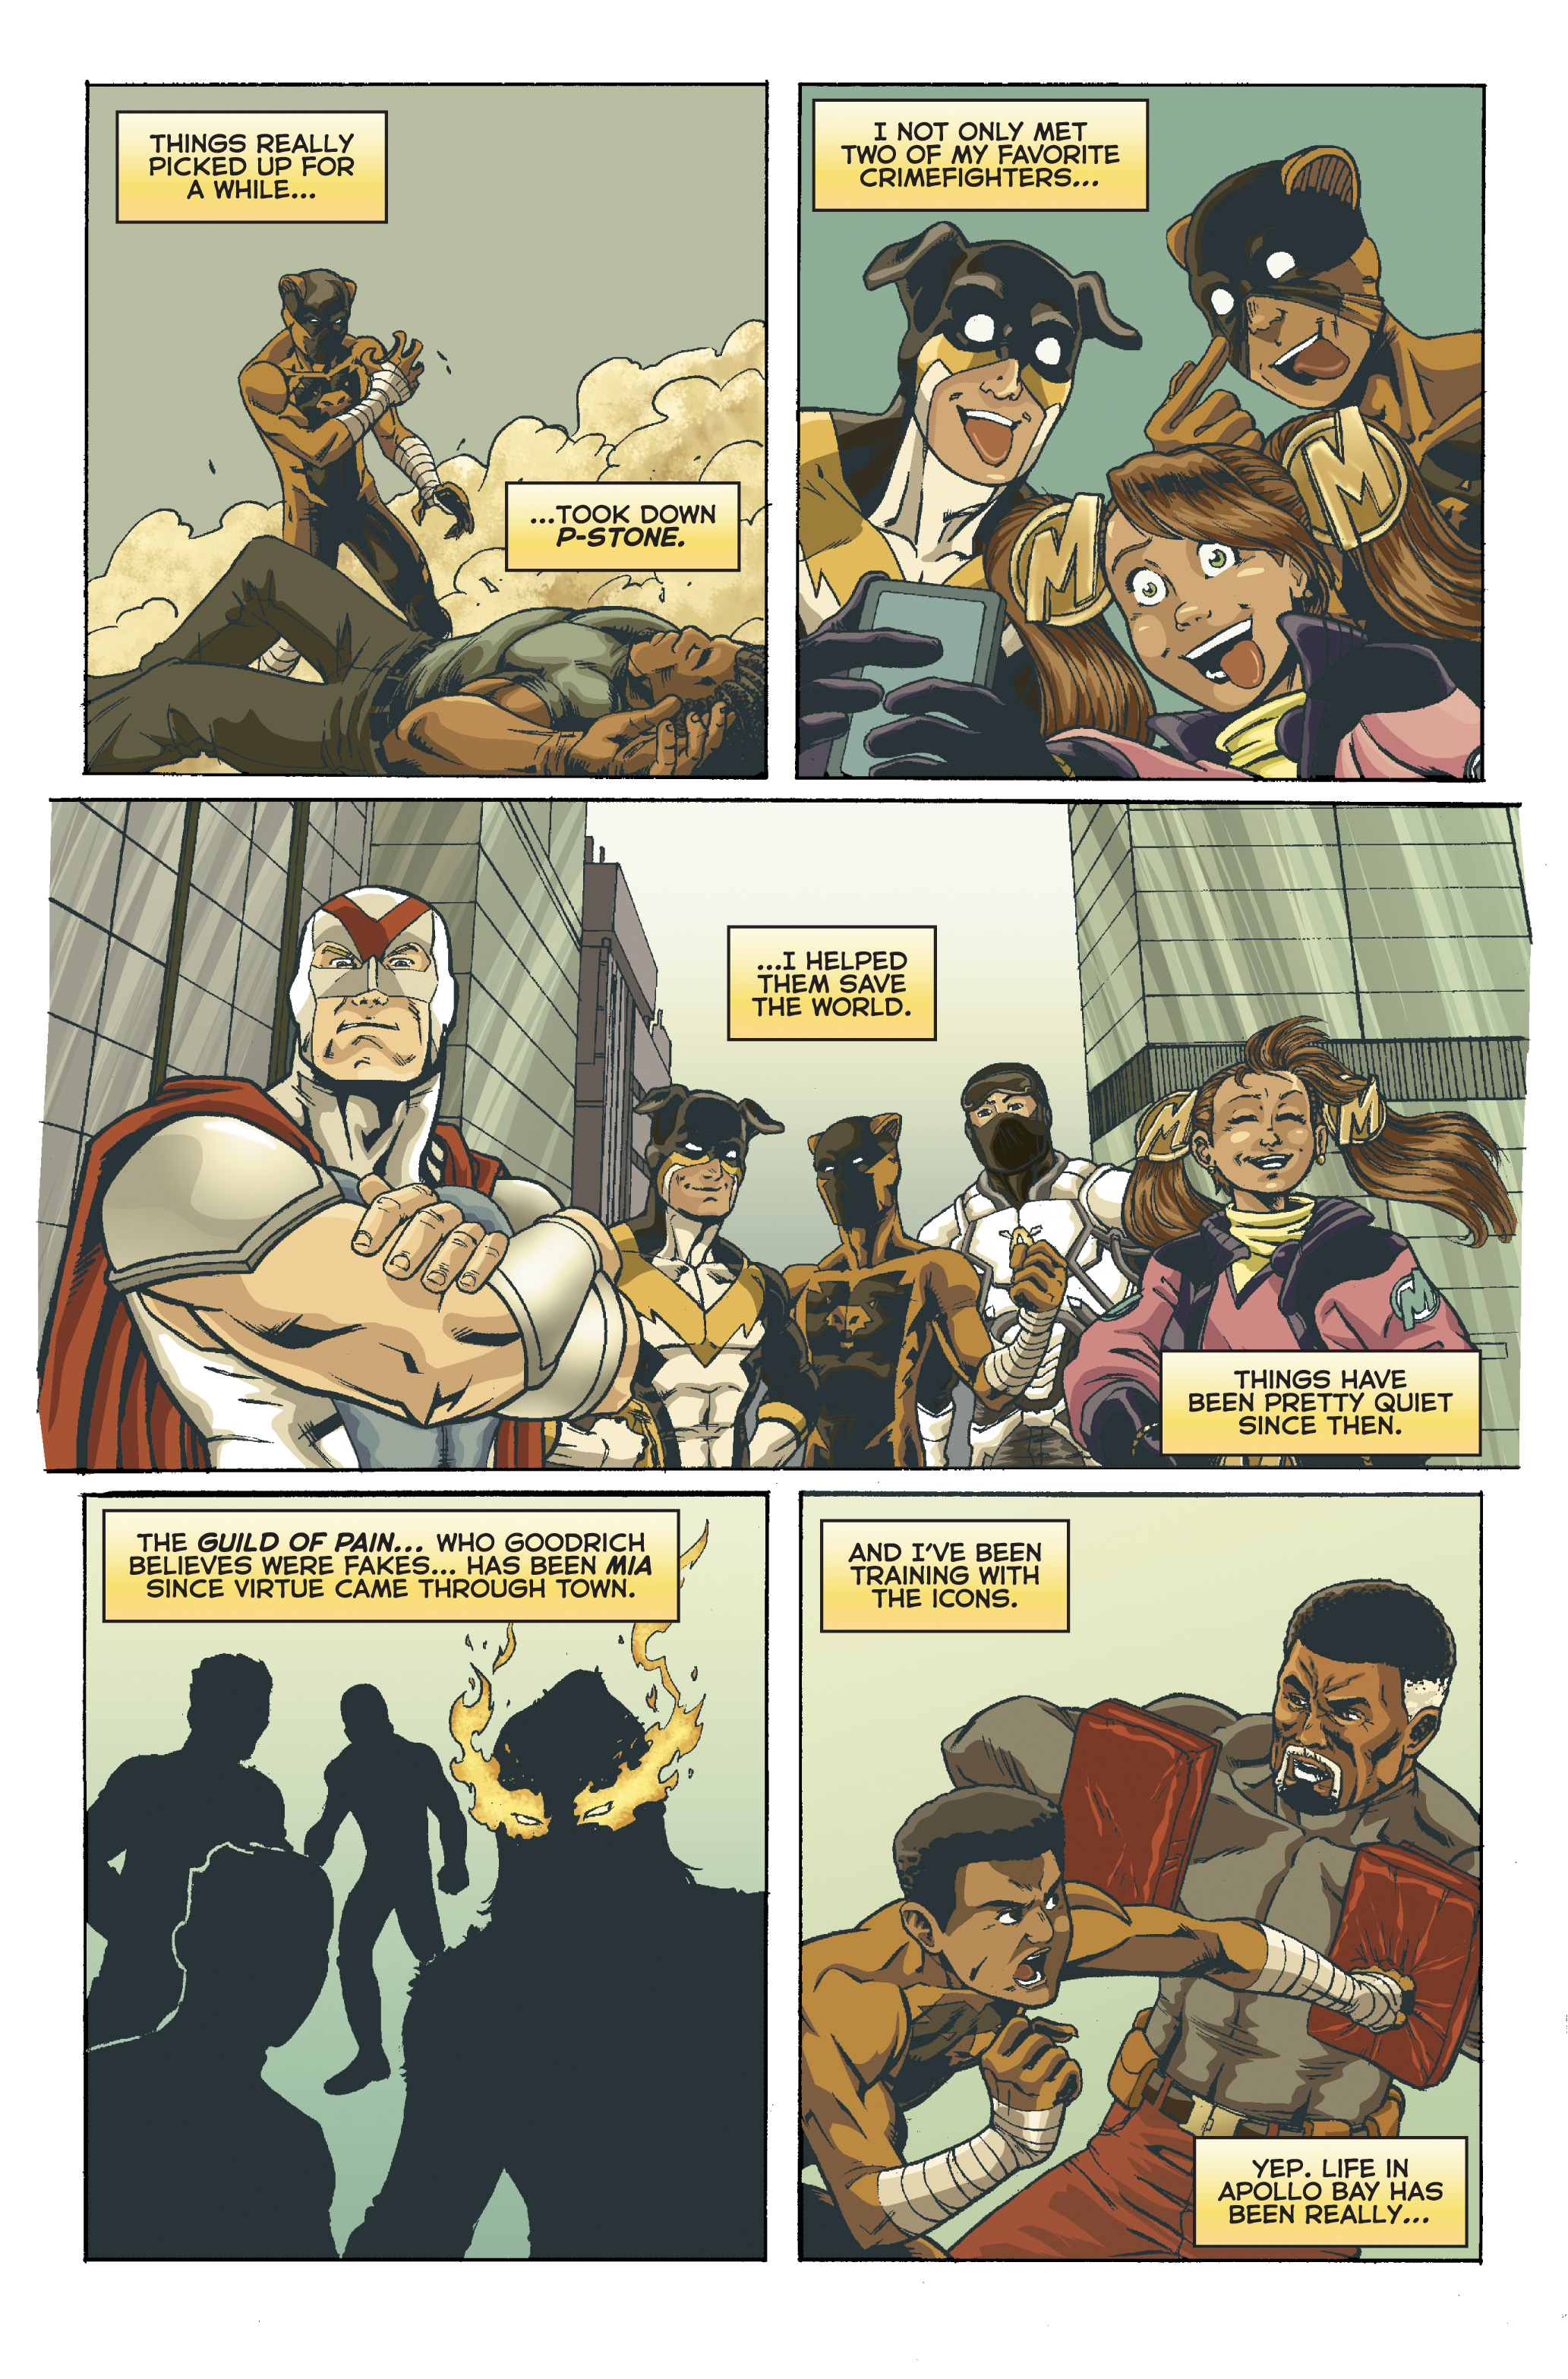 Actionverse #7 Featuring Midnight Tiger Page 2.jpg